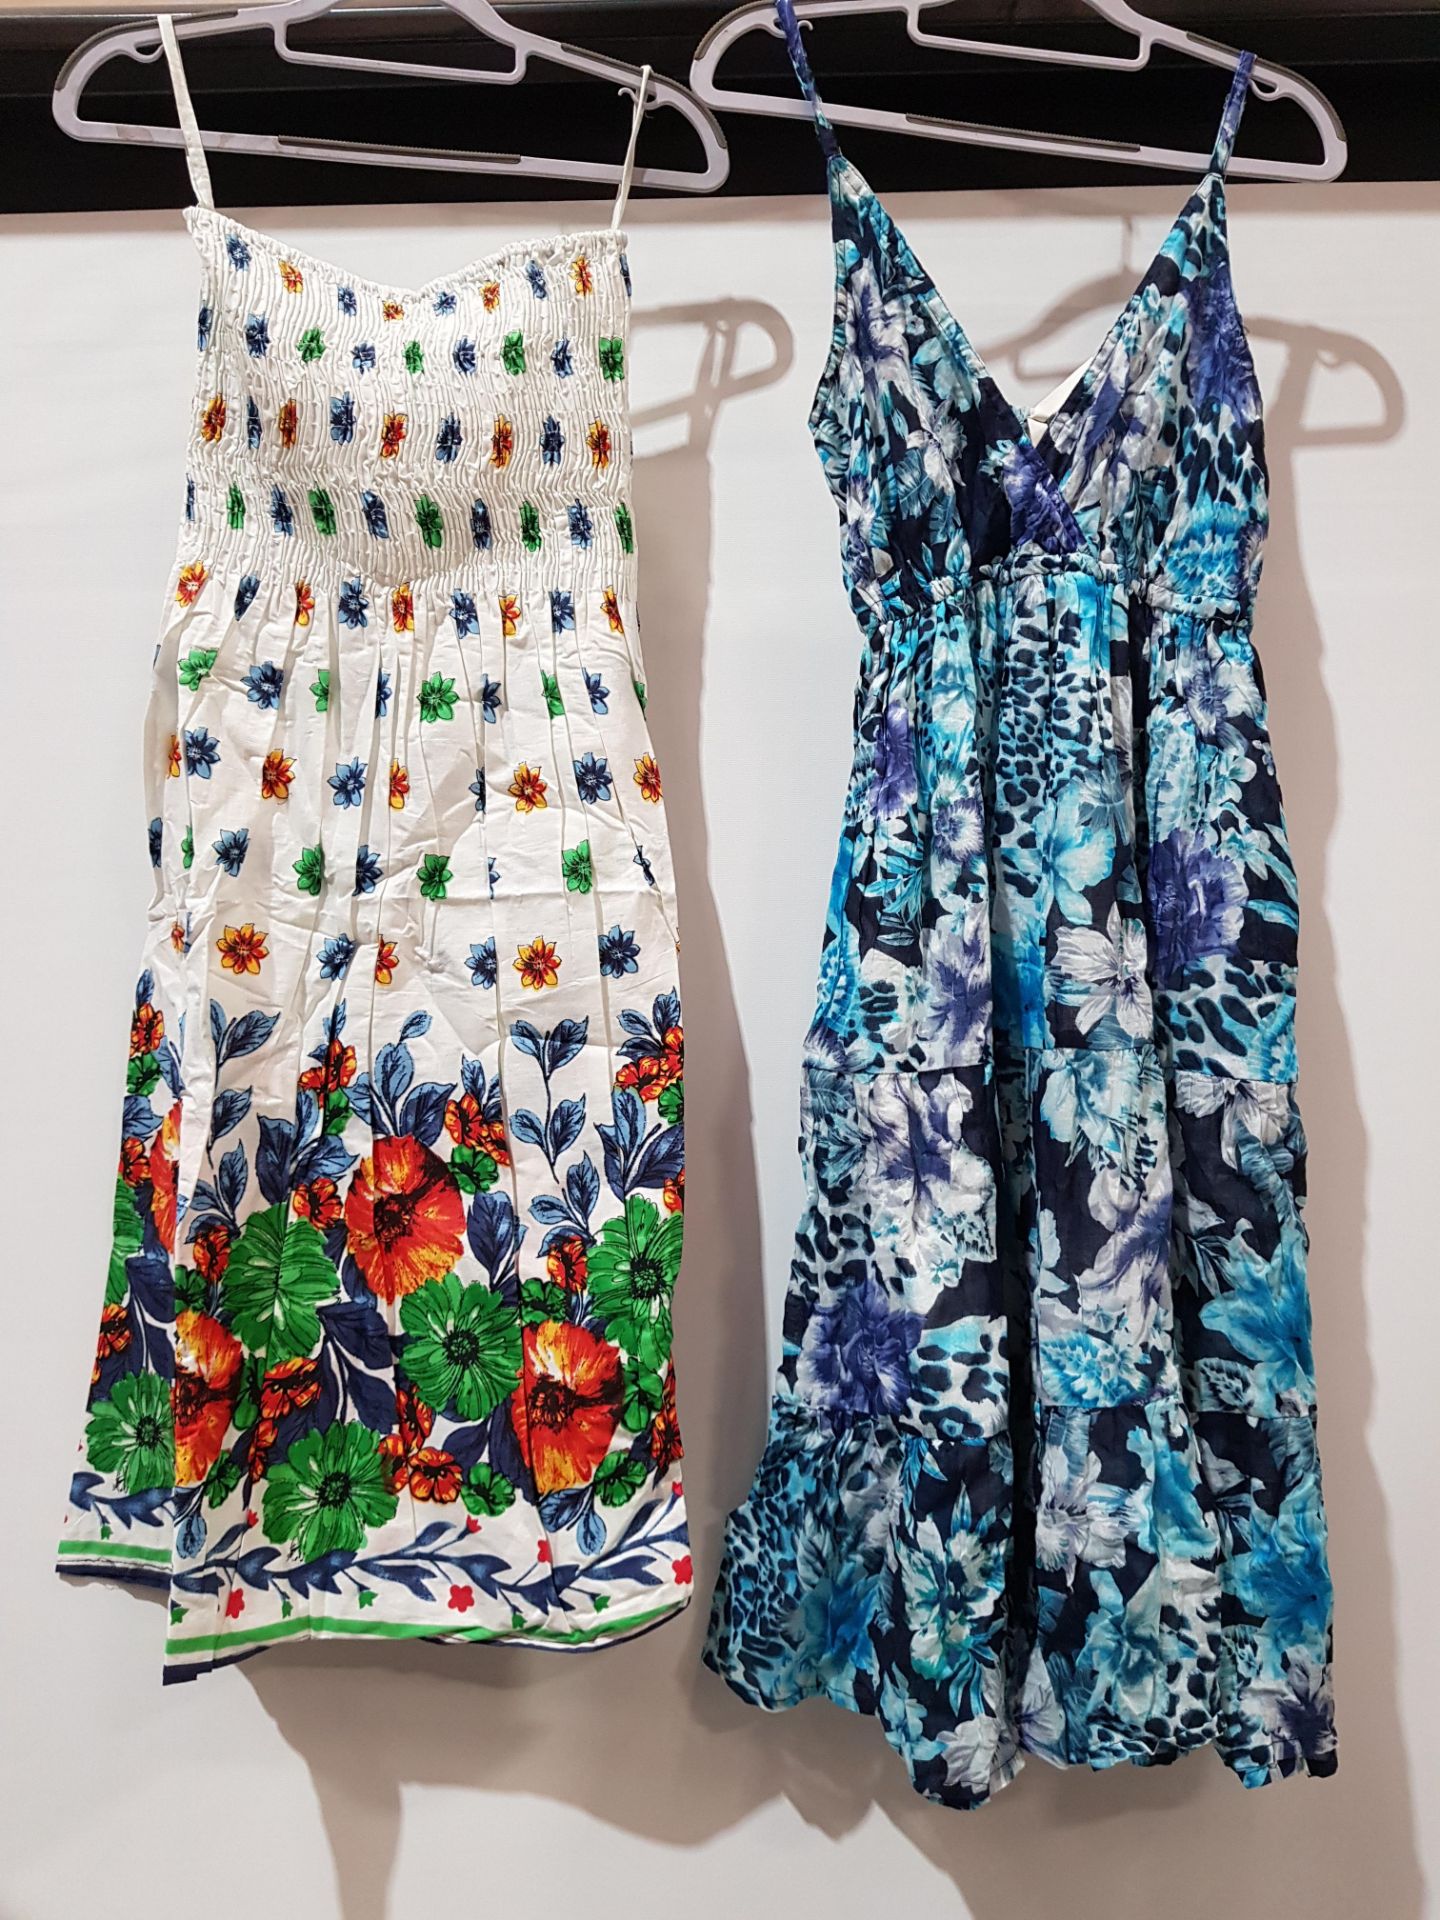 19 X BRAND NEW MIXED STYLES AND SIZES SUMMER PISTACHIO DRESSES - RRP £25 EACH £600 TOTAL- IN TWO